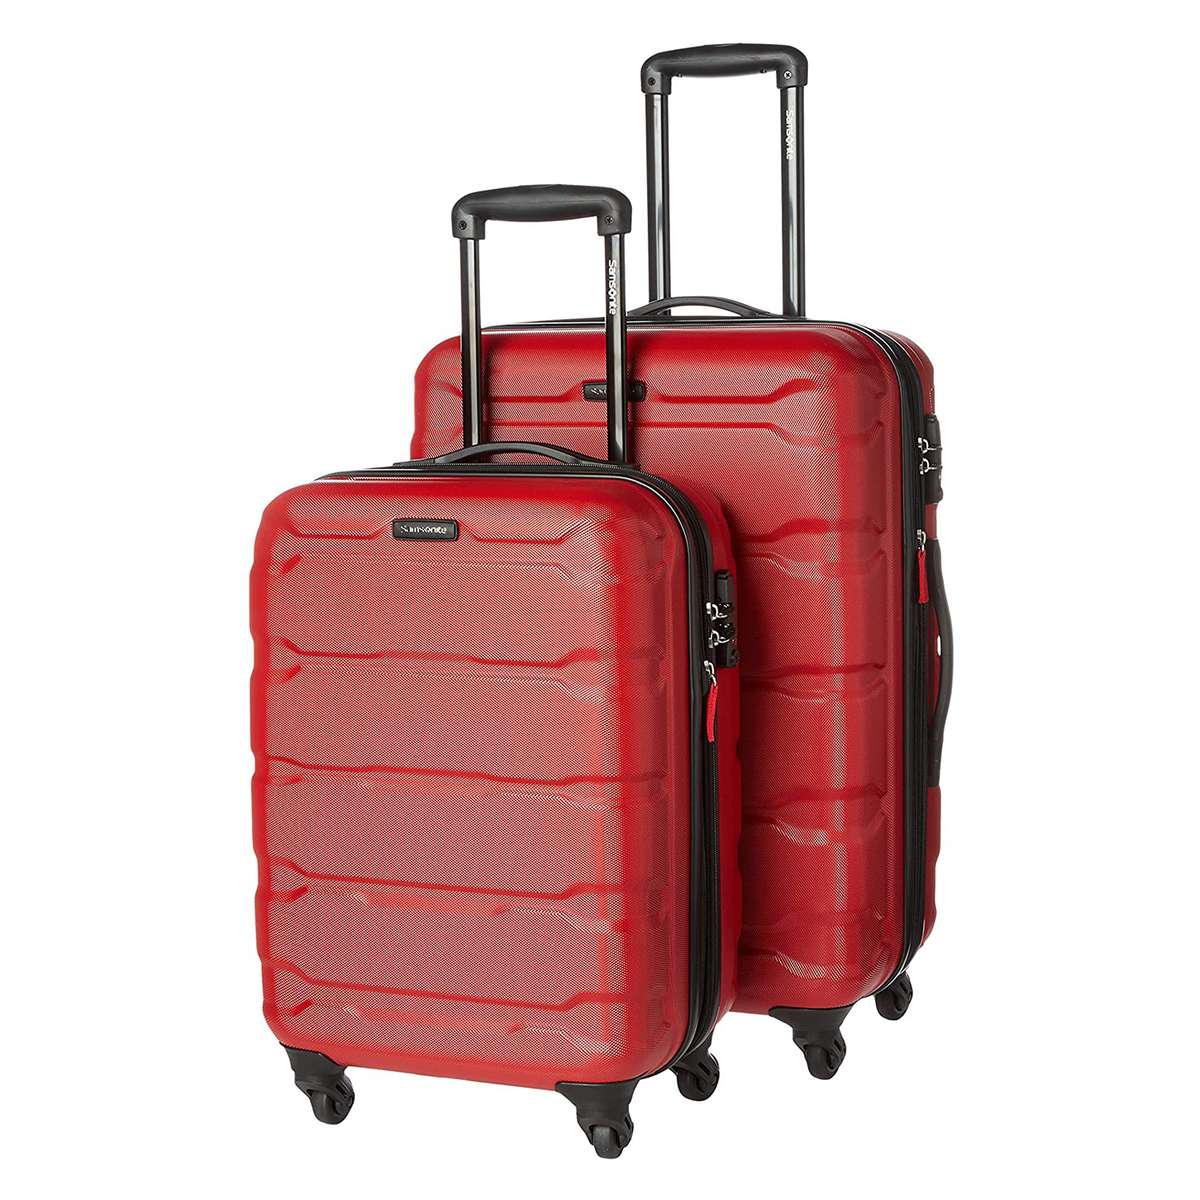 Samsonite Omni PC Hardside Expandable Luggage with Spinner Wheels, Red